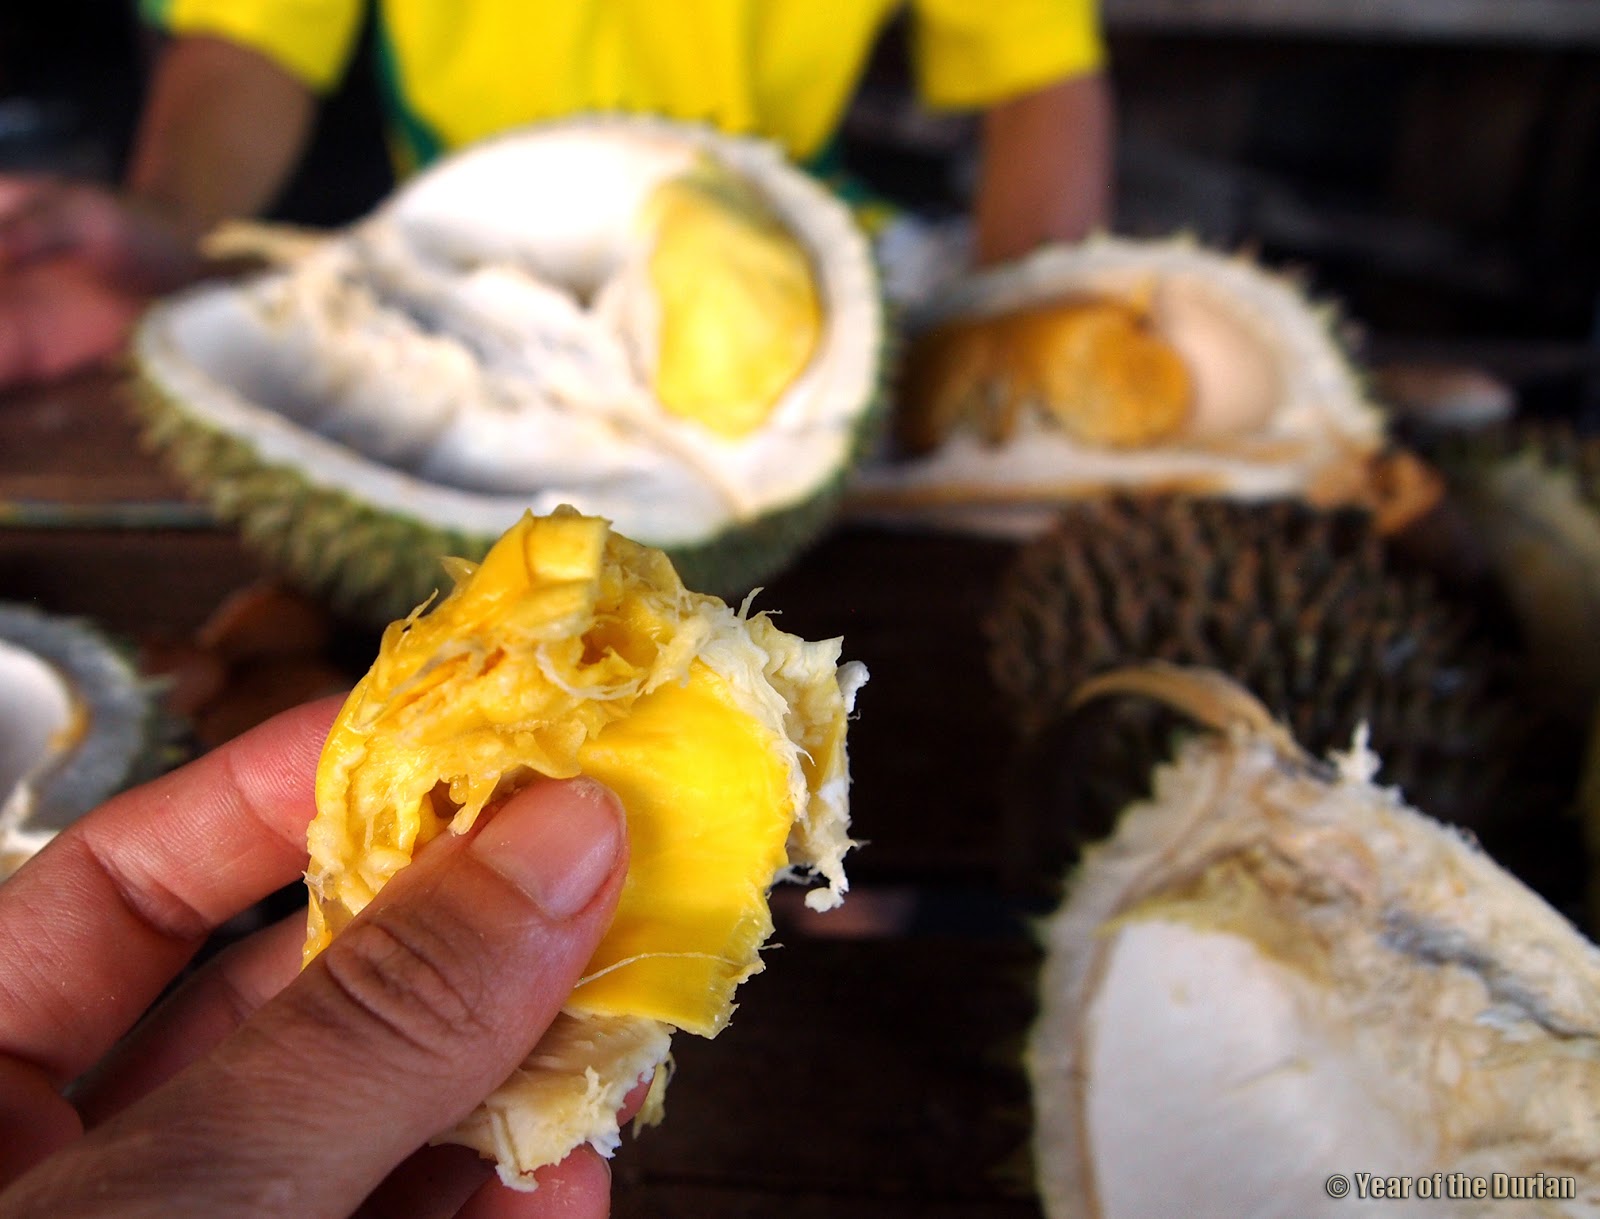 Year of the Durian: Tasting the Most Expensive Durian in the World